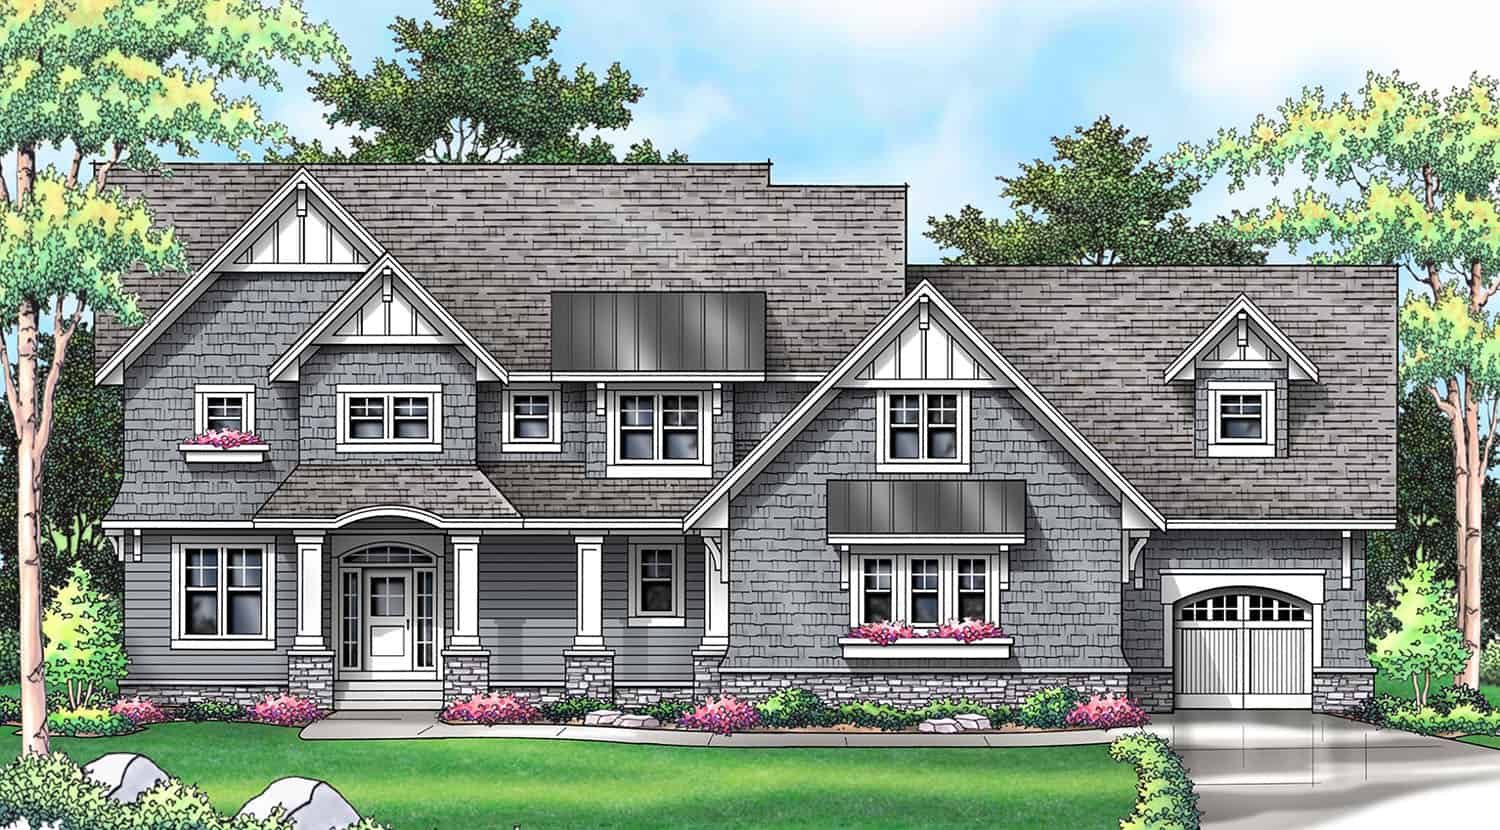 lodge-style-home-exterior-sketch